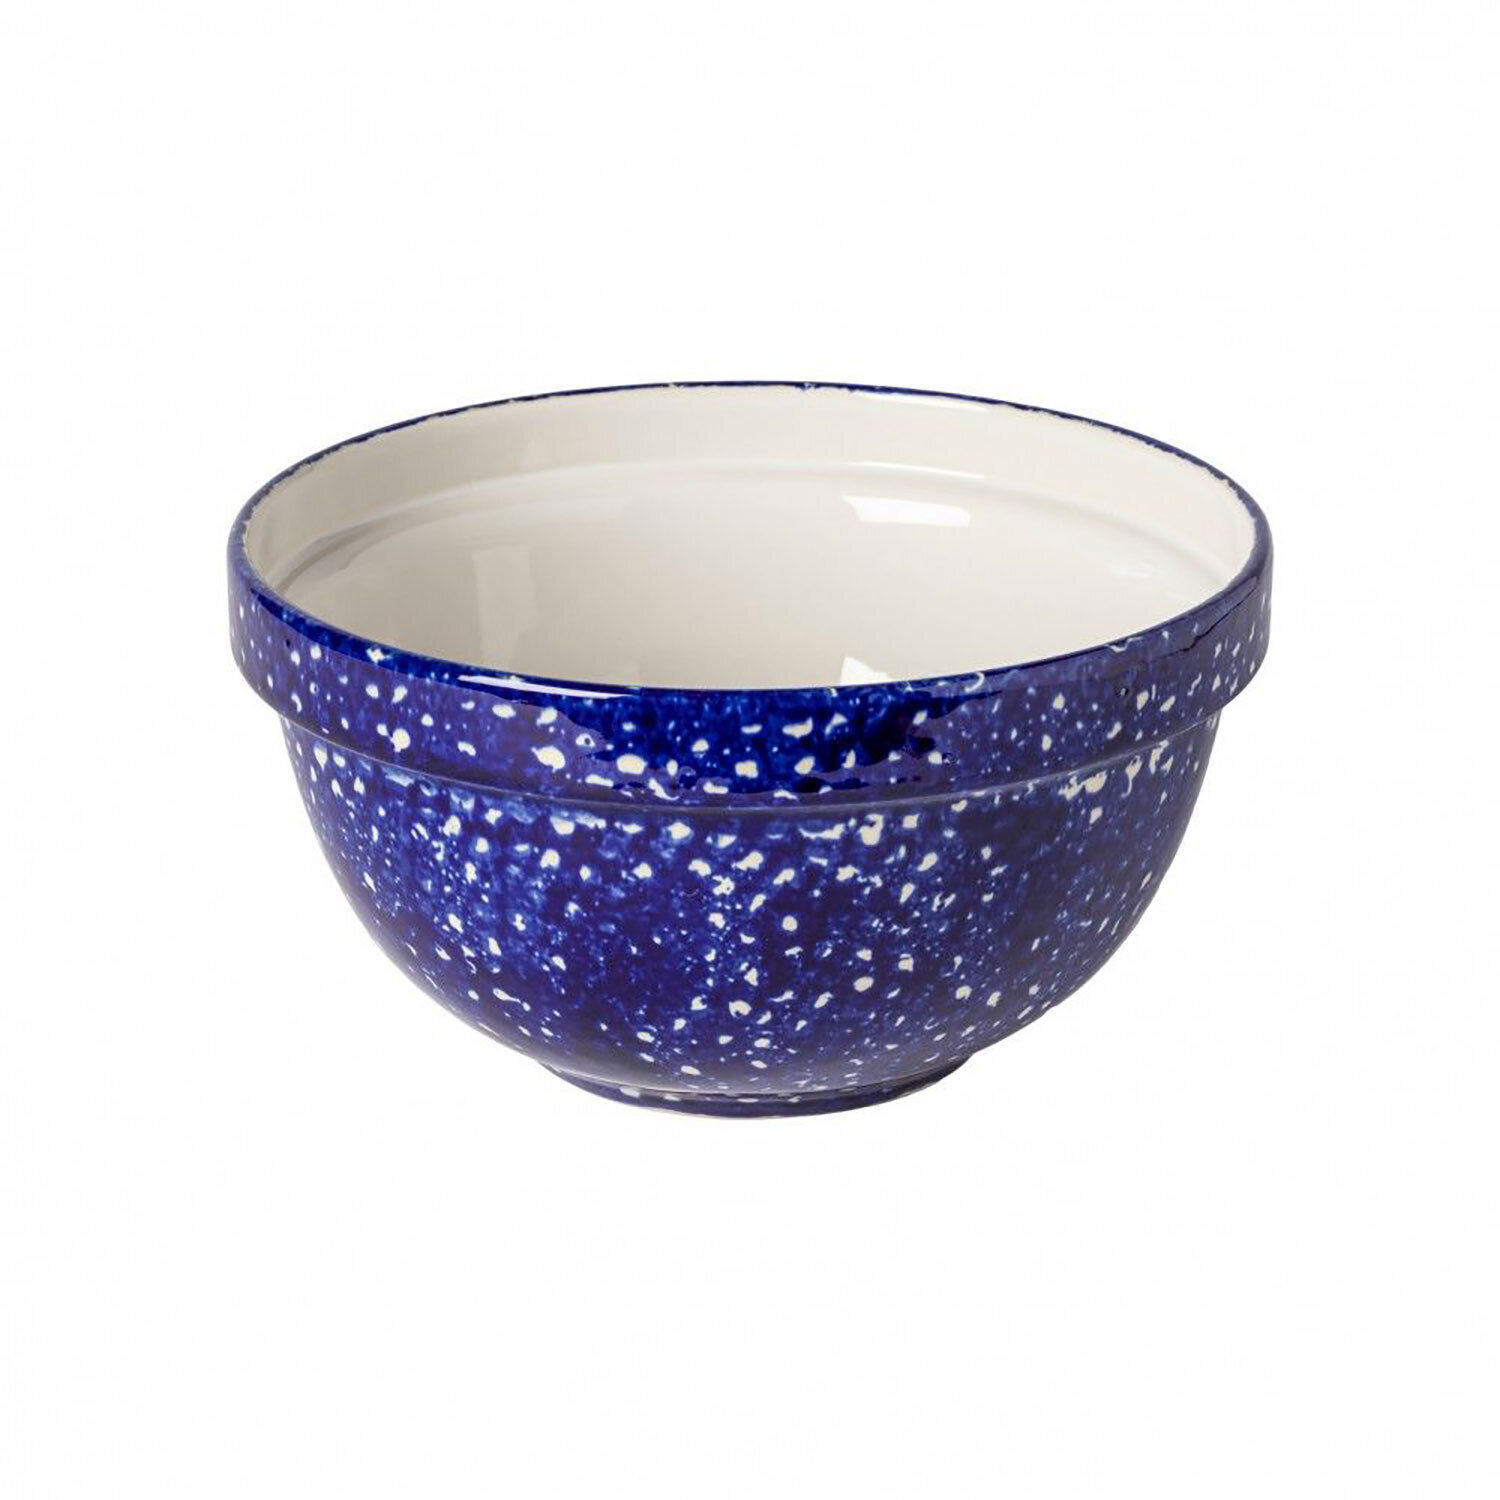 Casafina Abbey Blue White Splatter Mixing Bowl 9 Inch MBS241-BWH